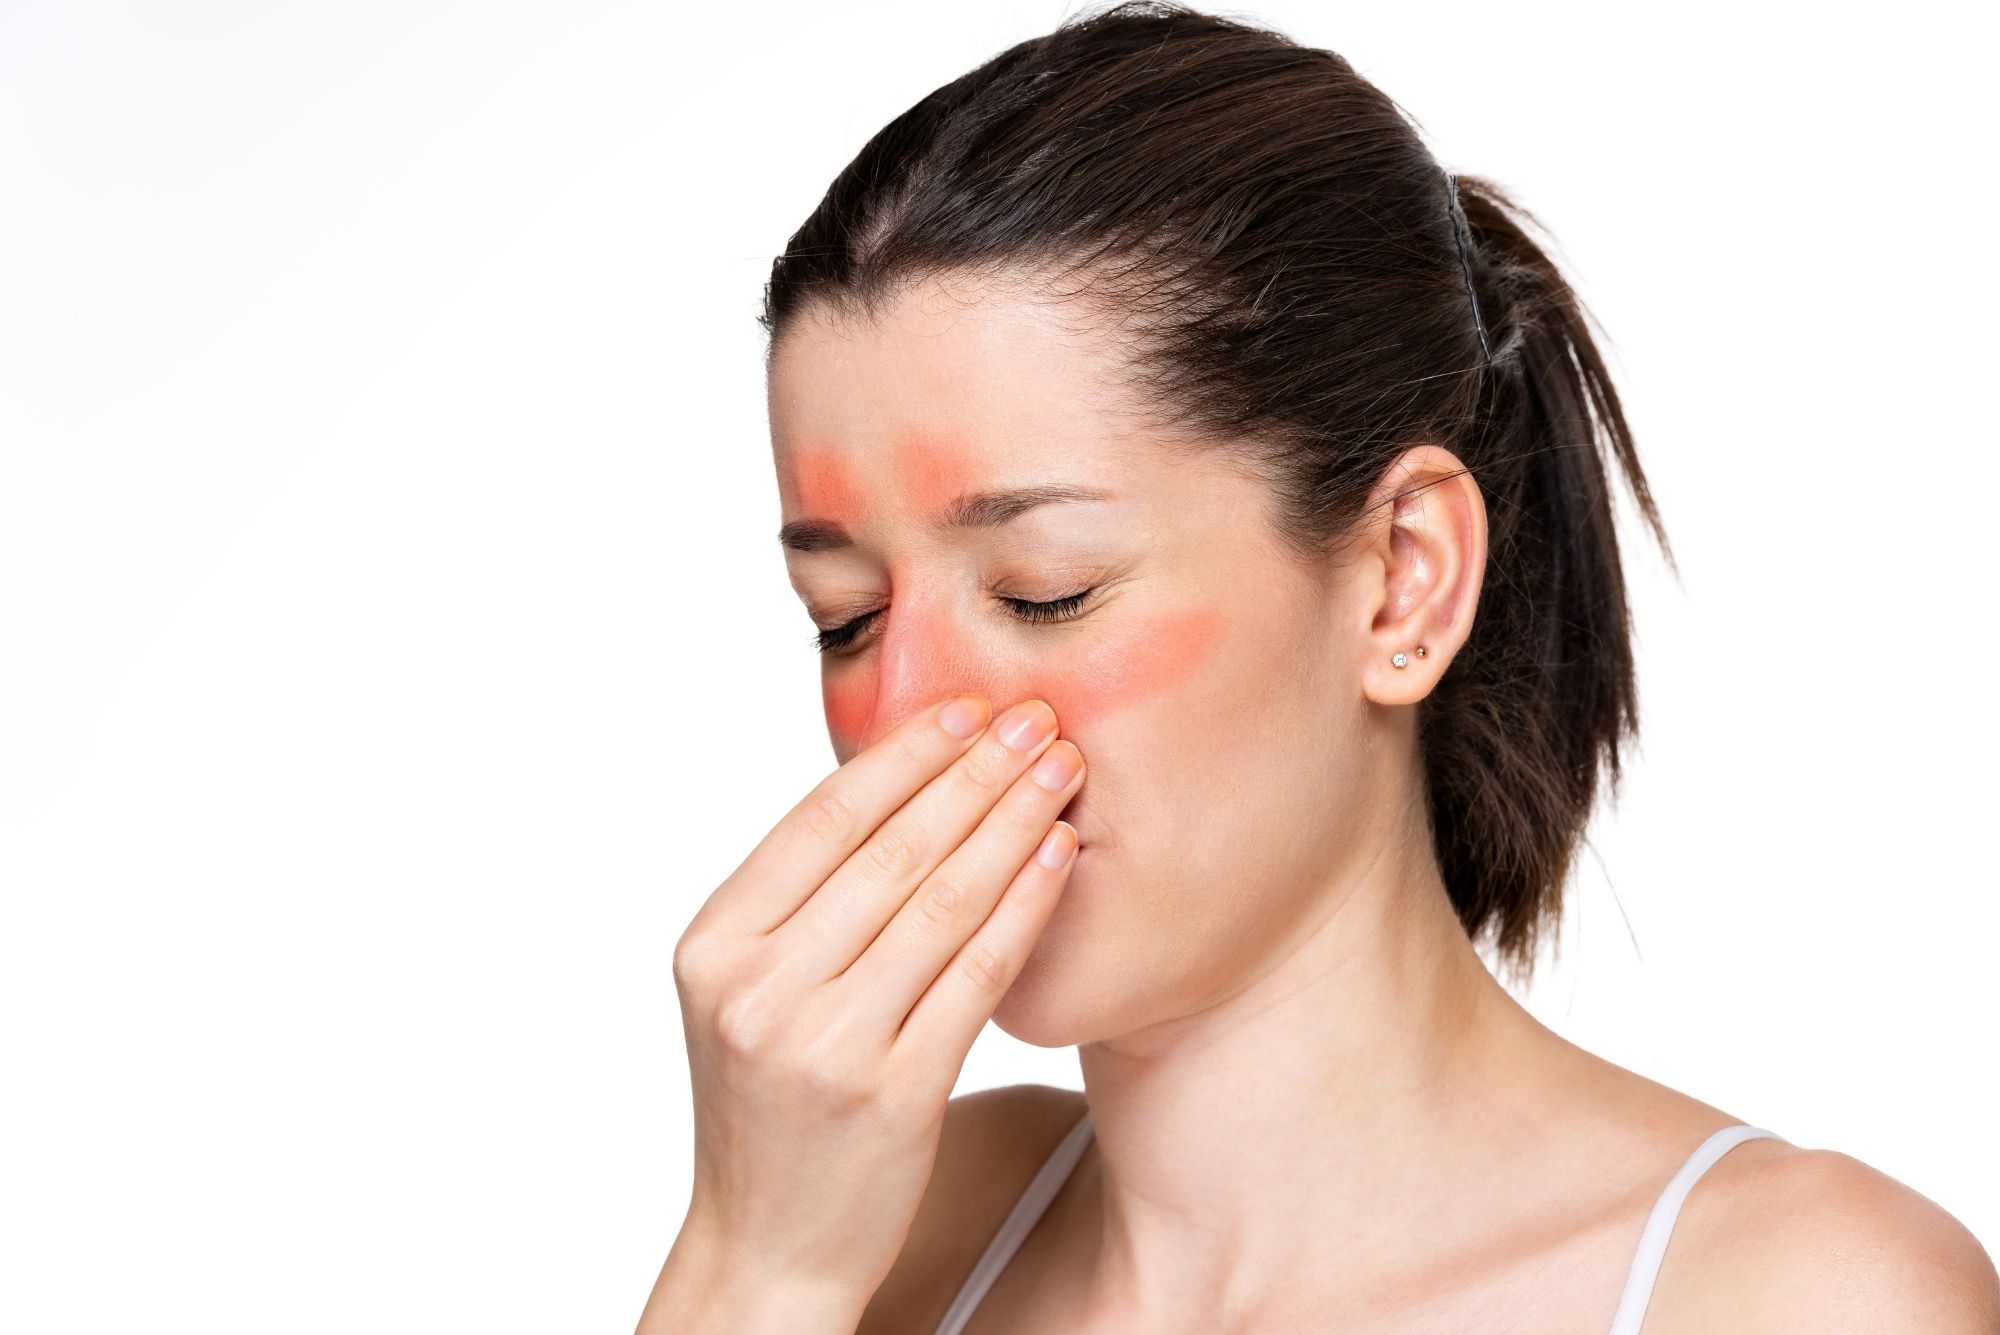 A woman closes her eyes and touches her nose while areas of her face are highlighted in red to represent sinus issues.